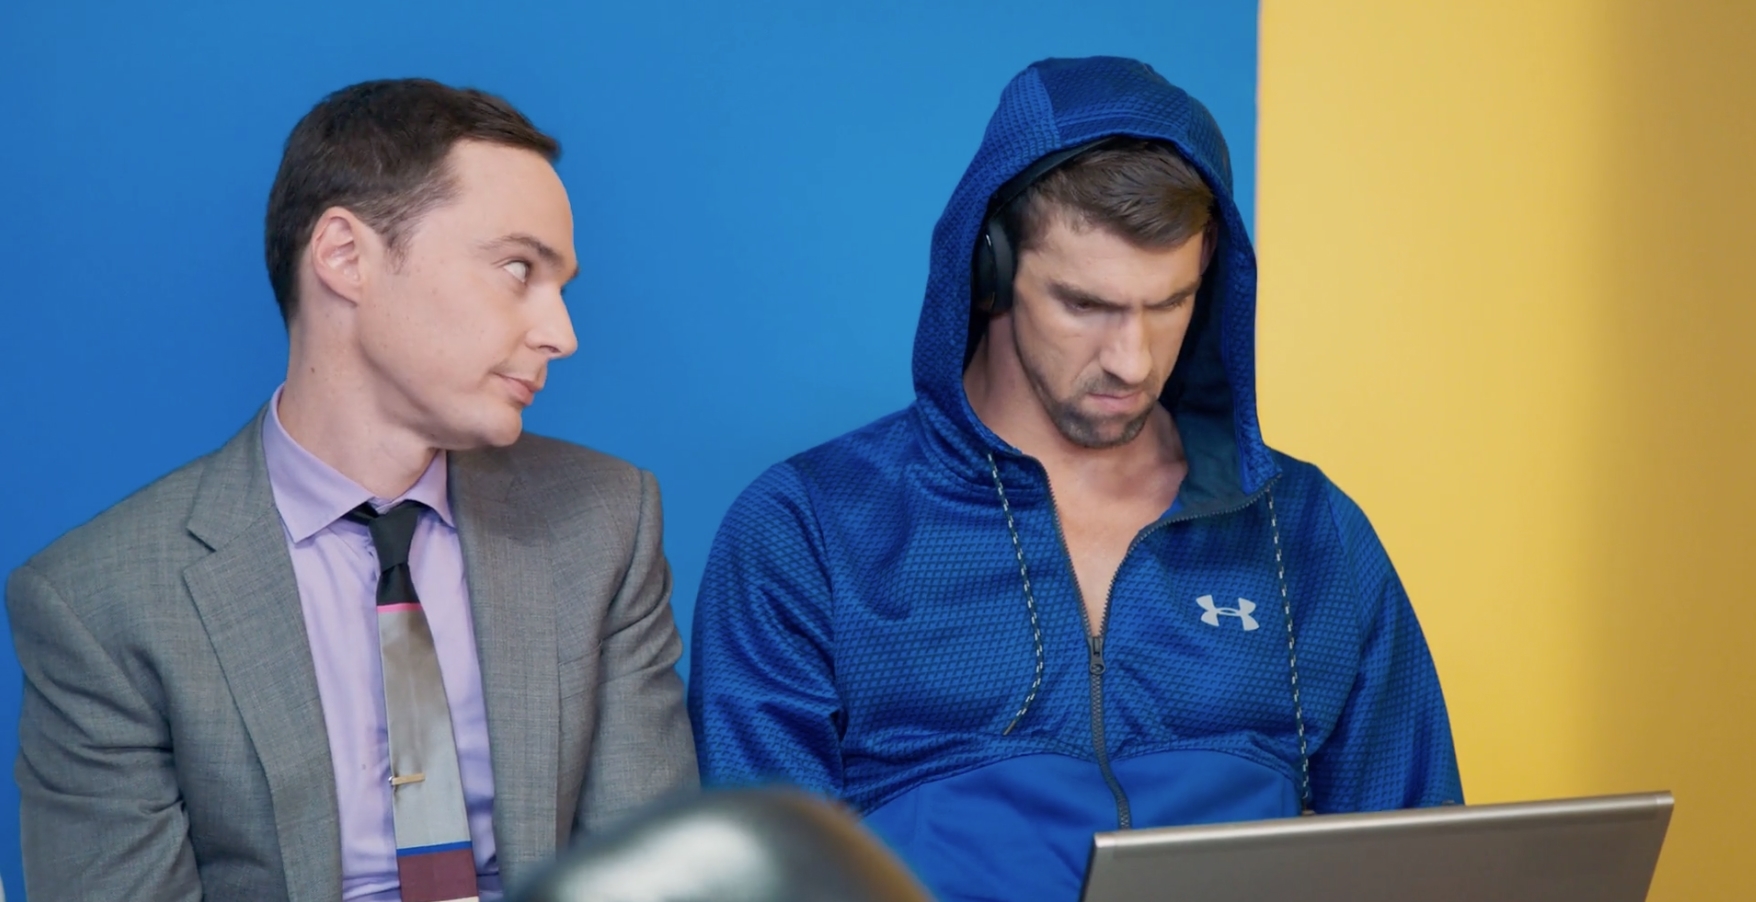 Michael Phelps and Jim Parsons are on set shooting the latest ads with Intel. The collaboration with Michael Phelps represents the latest evolution in Intel’s integrated marketing campaign with Jim Parsons that showcases better experiences found on new Intel-powered PCs. (Credit: Intel Corporation)